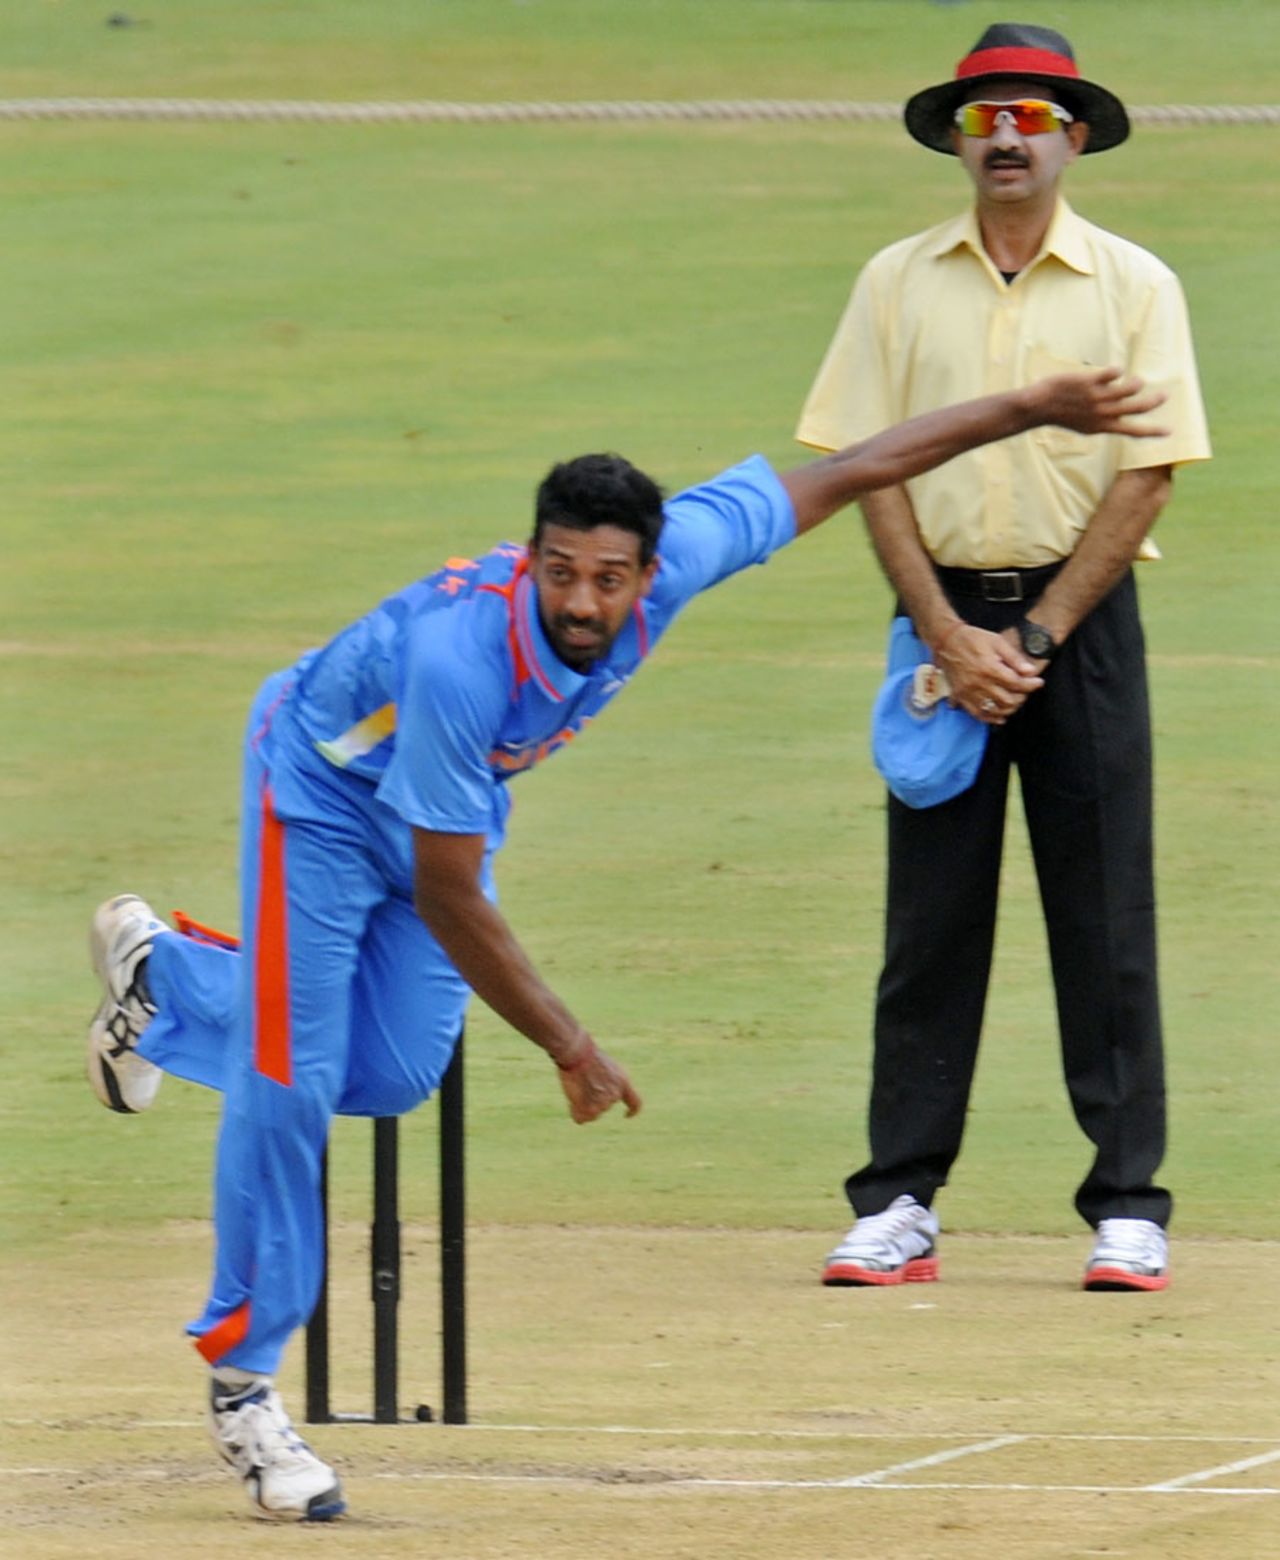 Dhawal Kulkarni in his delivery stride, India A v New Zealand A, first unofficial ODI, Visakhapatnam, September 8, 2013